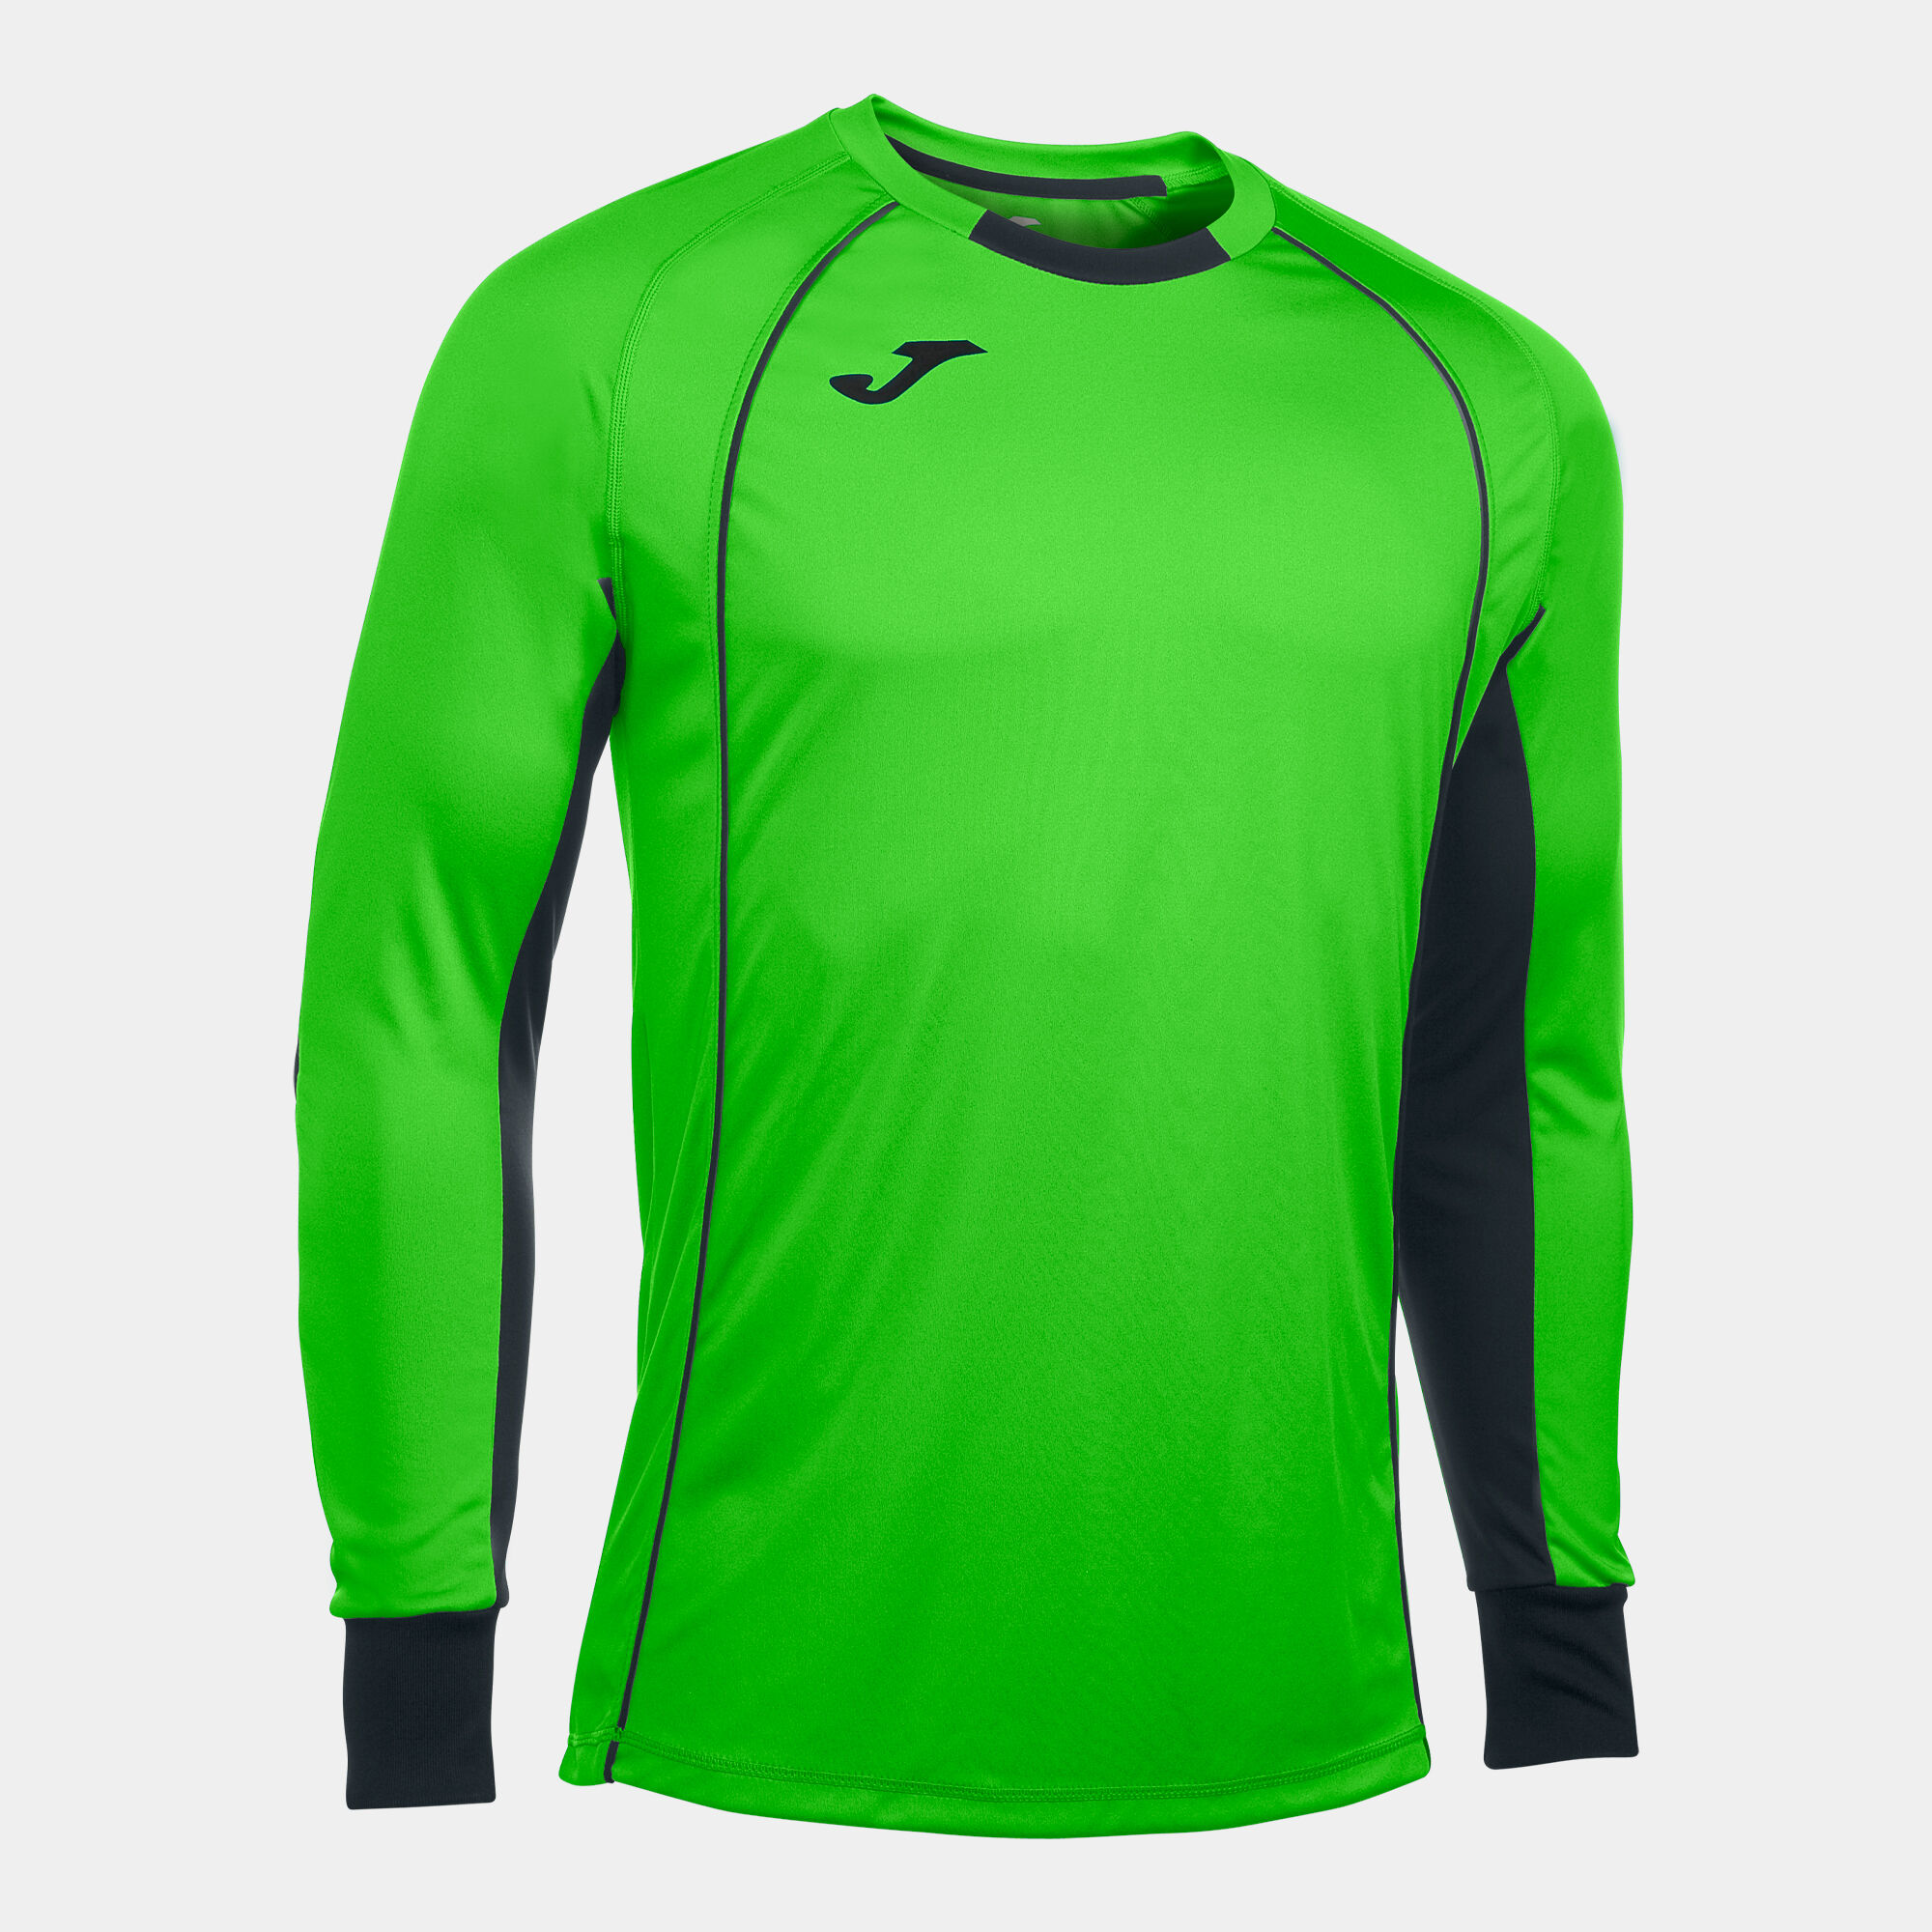 MAILLOT MANCHES LONGUES HOMME PROTEC VERT FLUO